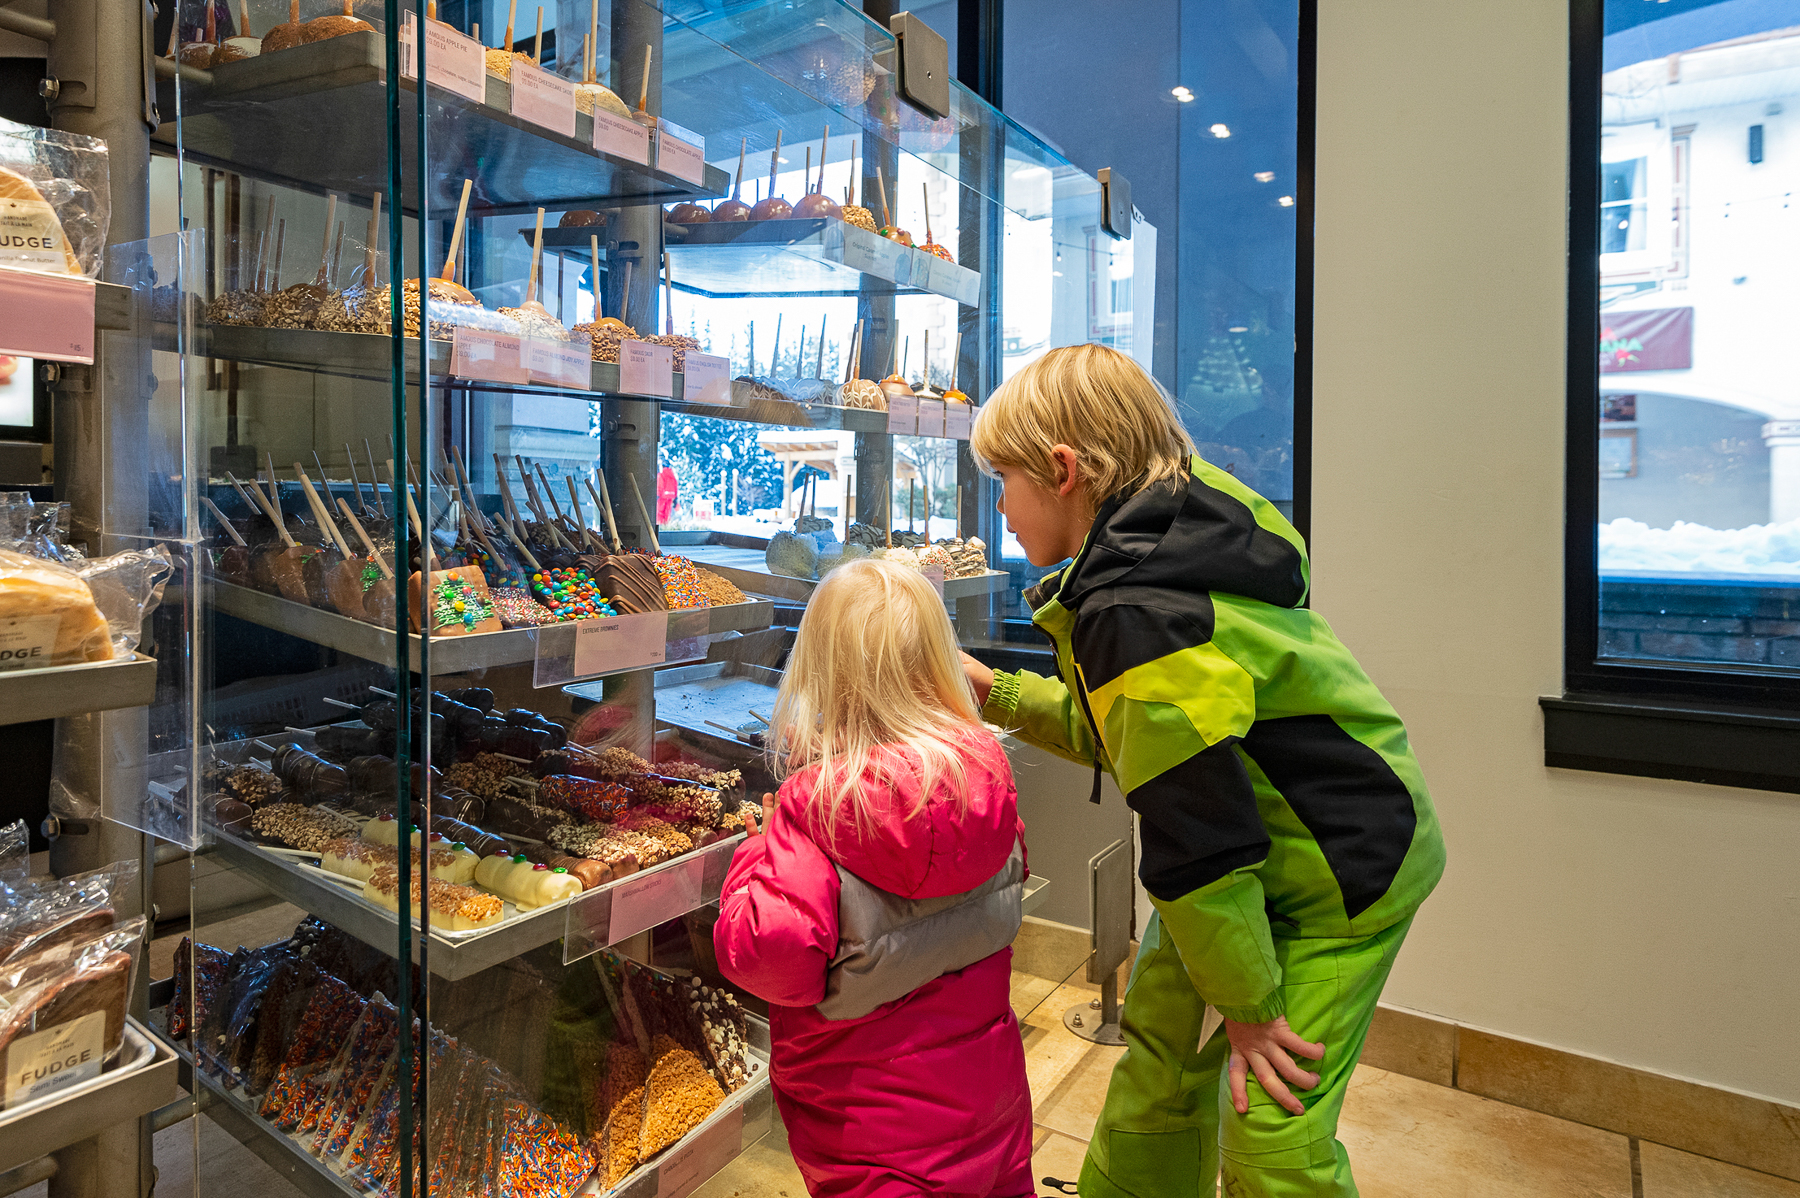 Children staring at candle through a glass wall in a candy shop